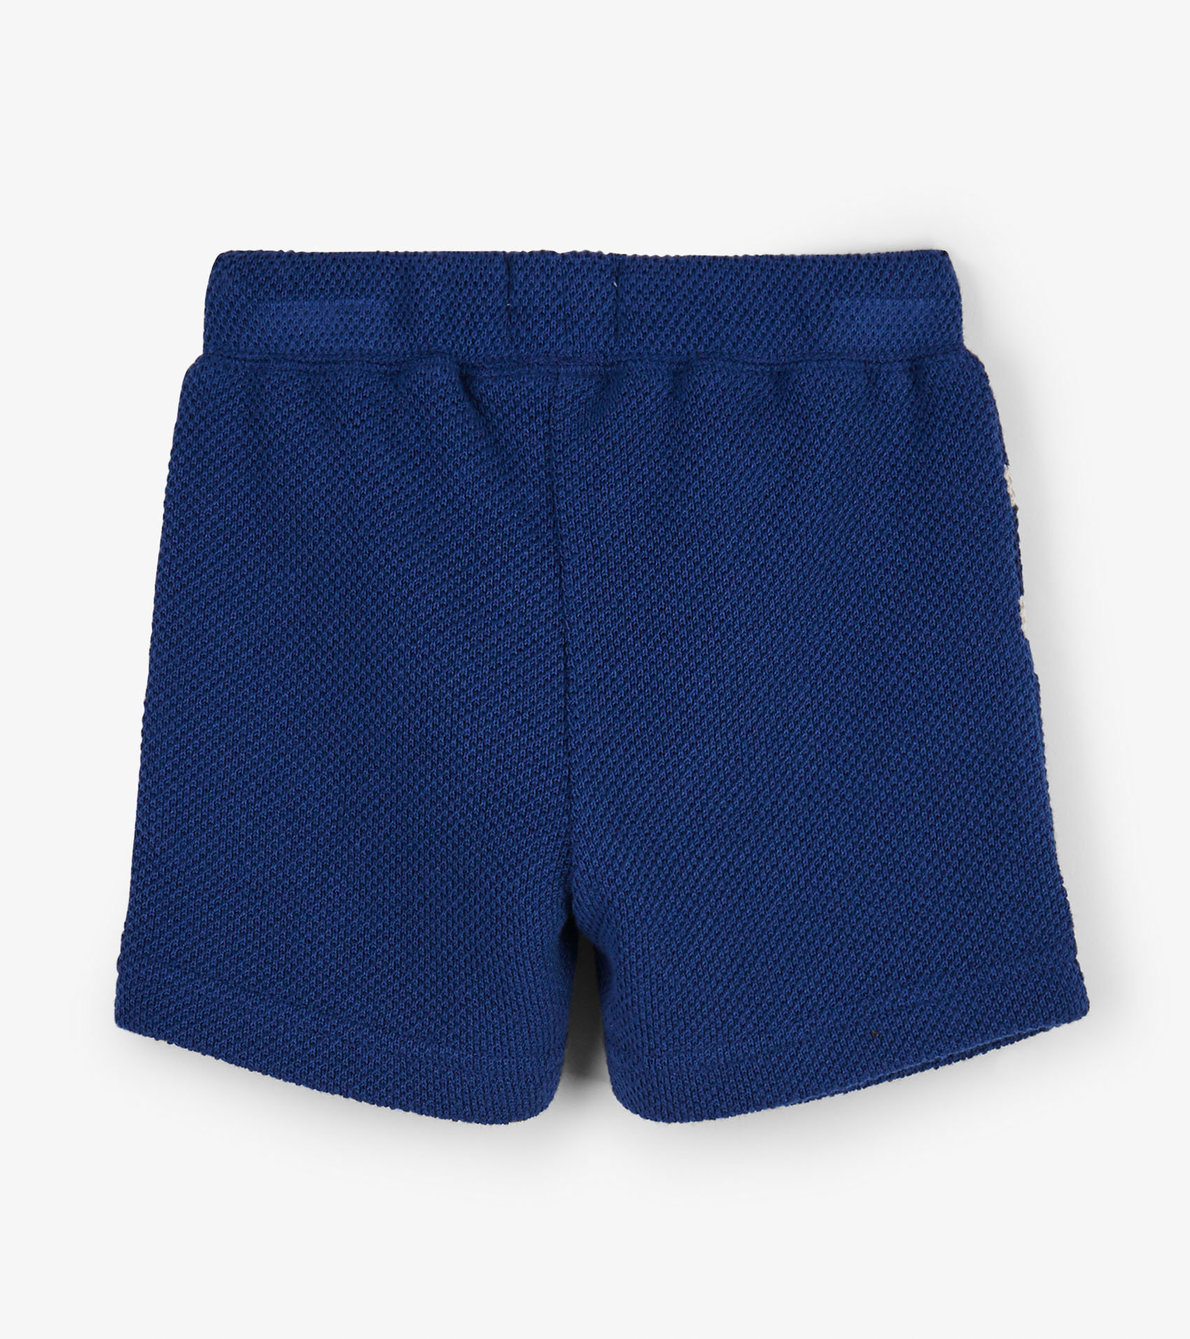 View larger image of Nautical Blue Baby Shorts